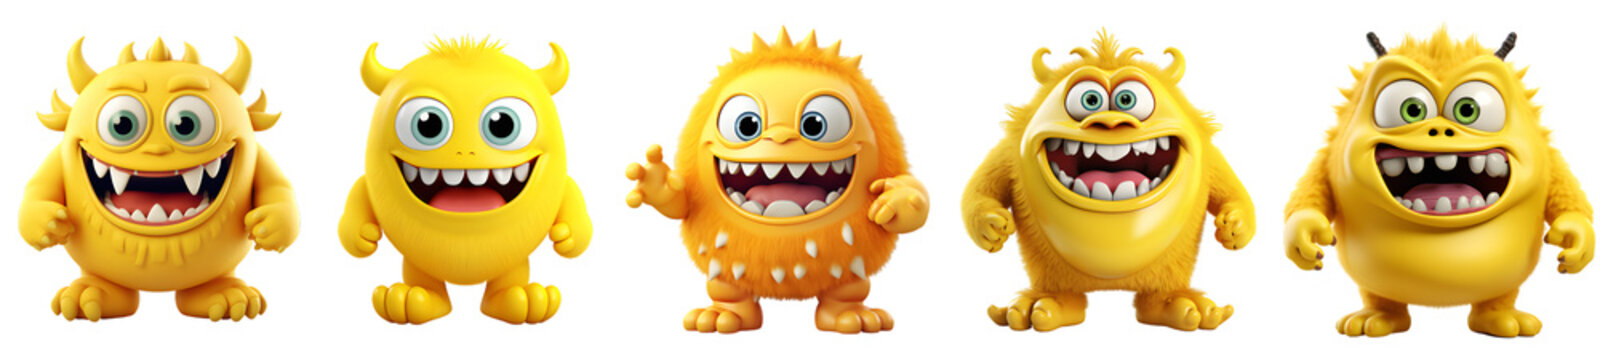 Cute 3d monsters collection, cartoon style. On Transparent background